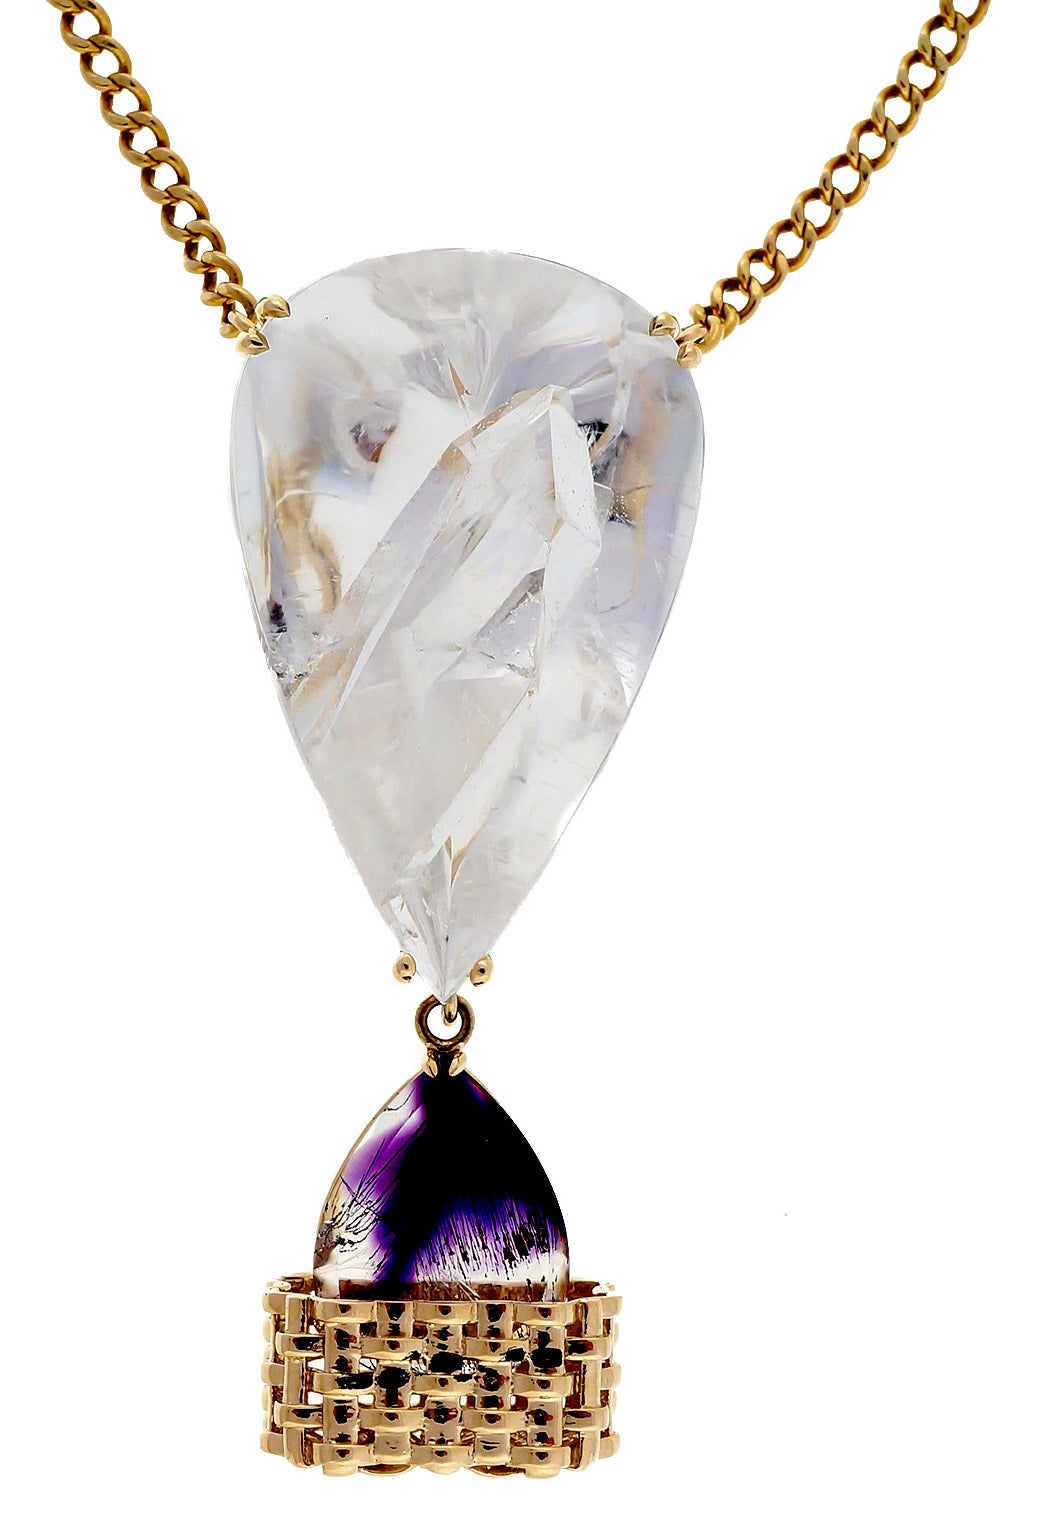 Super rare Manifestor Quartz pendant with a fully formed Quartz crystal encased by nature in clear Quartz. Multiple rainbow inclusions. Exceptional energy. Very clear. Pendant designed and made in the Peter Suchy Workshop. Stone are from a